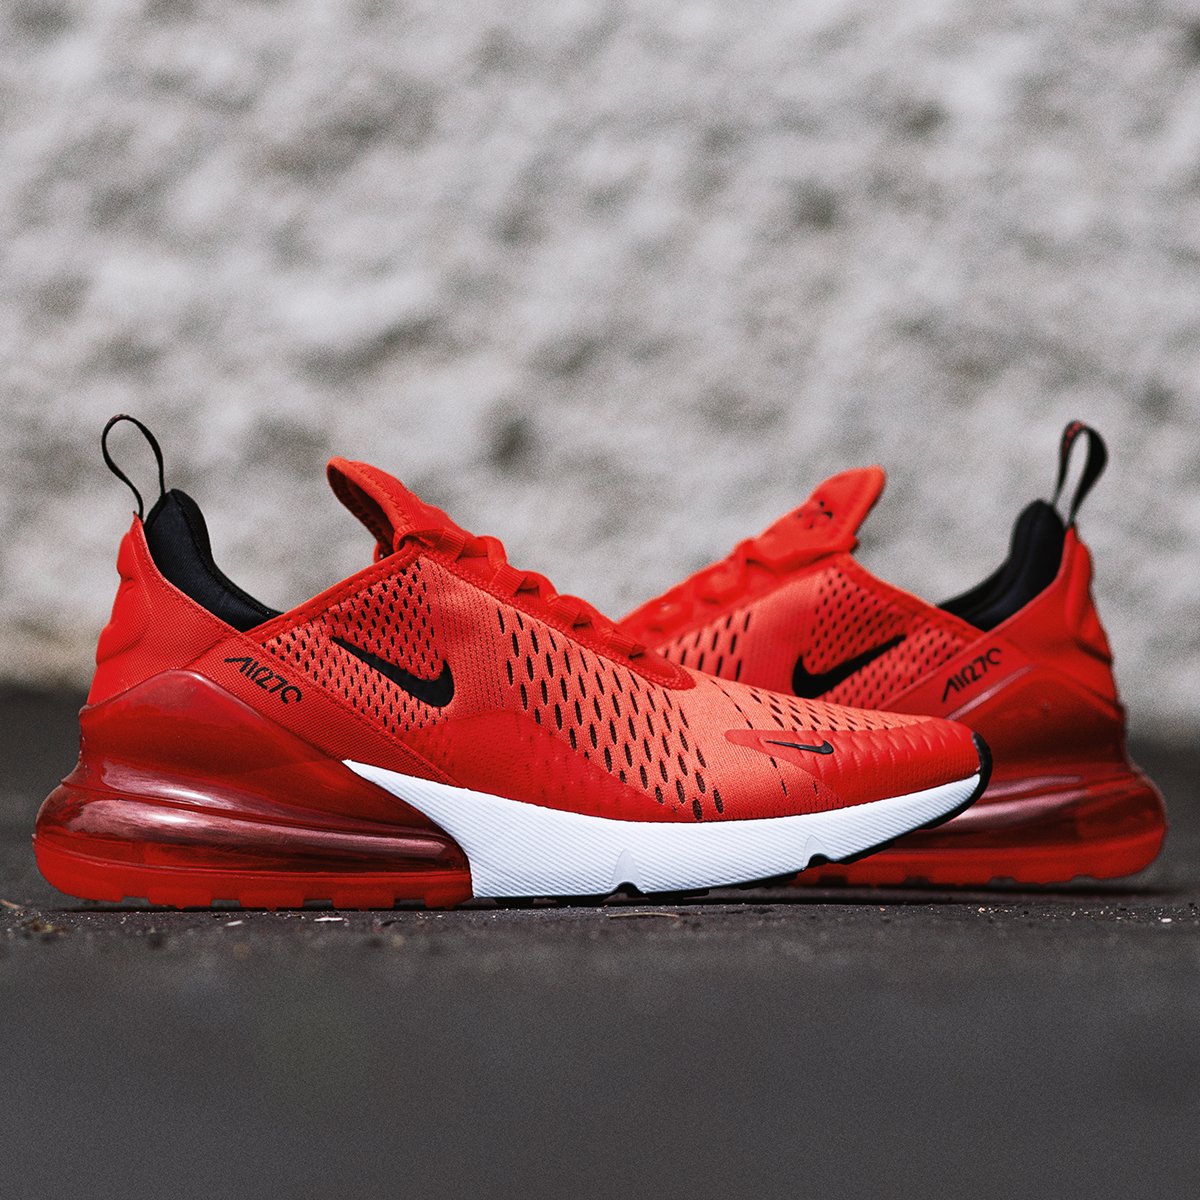 City Gear Twitter: "#NewRelease The @Nike Air Max 270 Red" is available now in-stores and online: https://t.co/yl1uVZF753" / Twitter